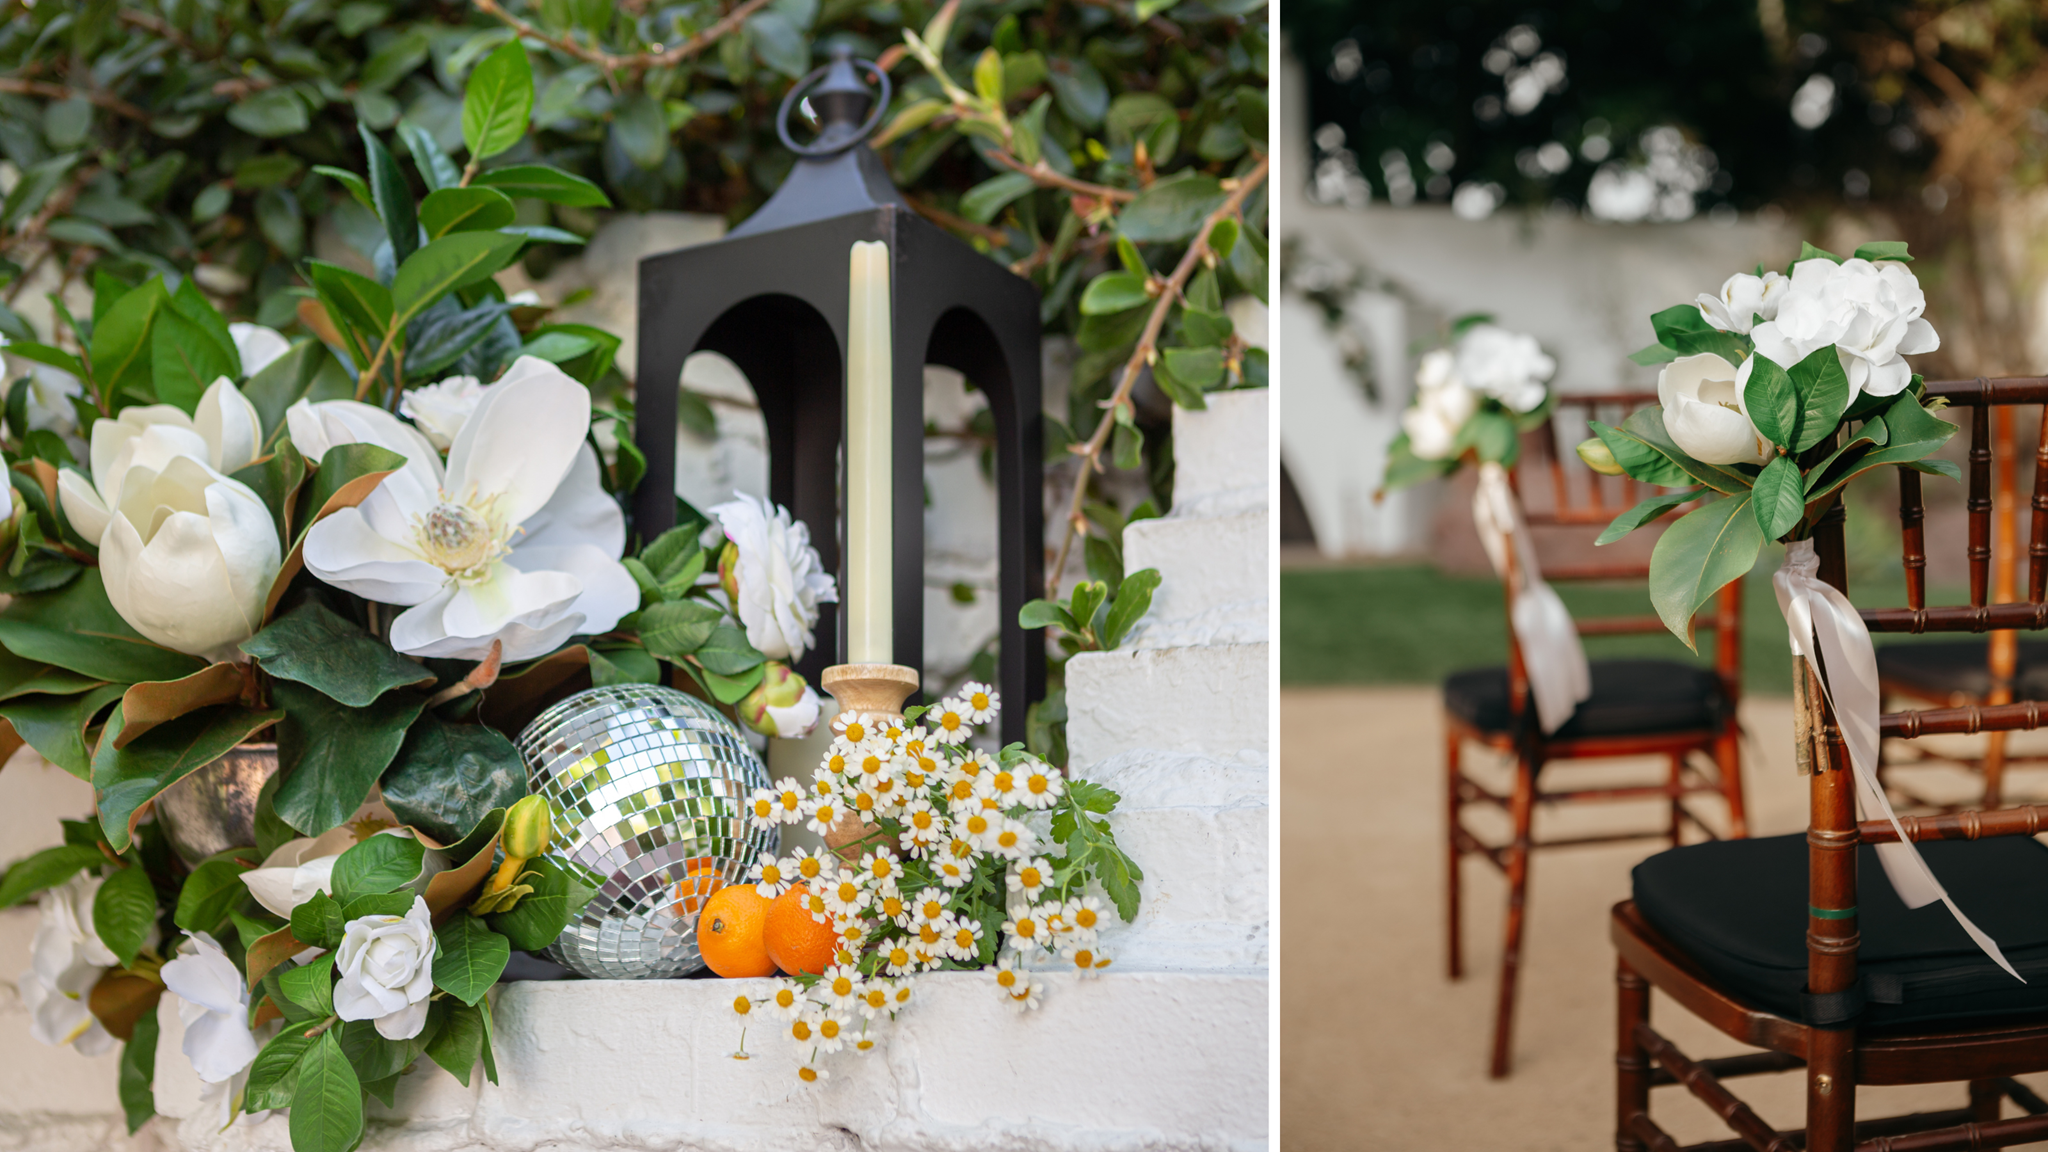 How to Resell Wedding Decor - Blogs - Borrowing Magnolia